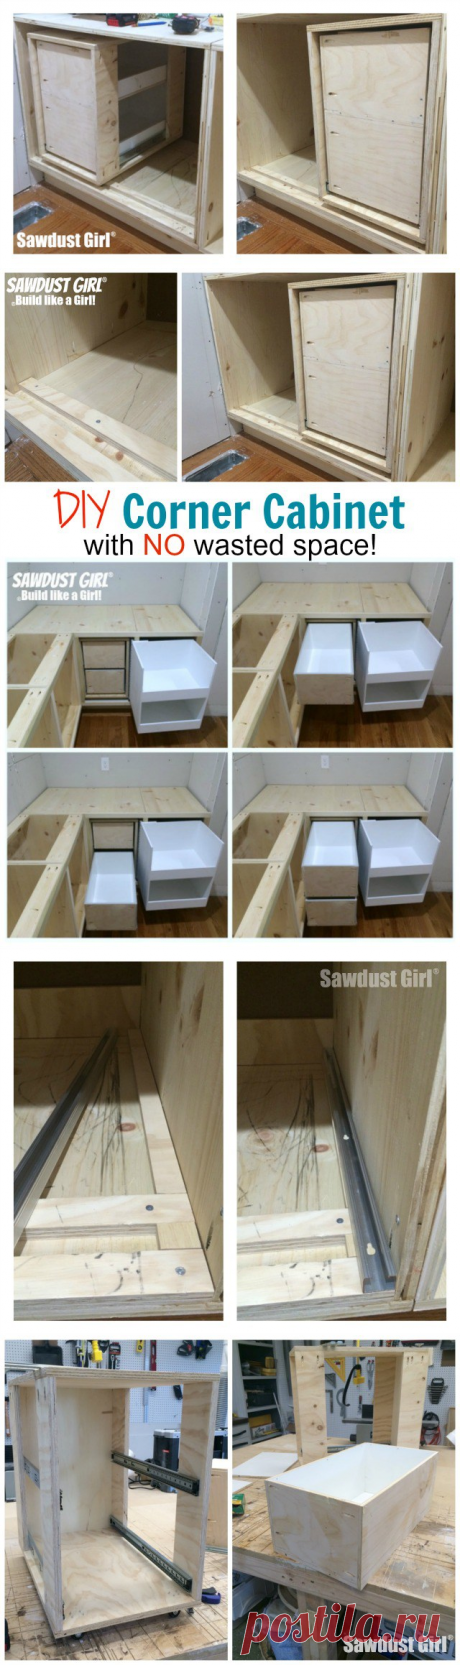 Blind corner cabinet with NO wasted space! - Sawdust Girl®